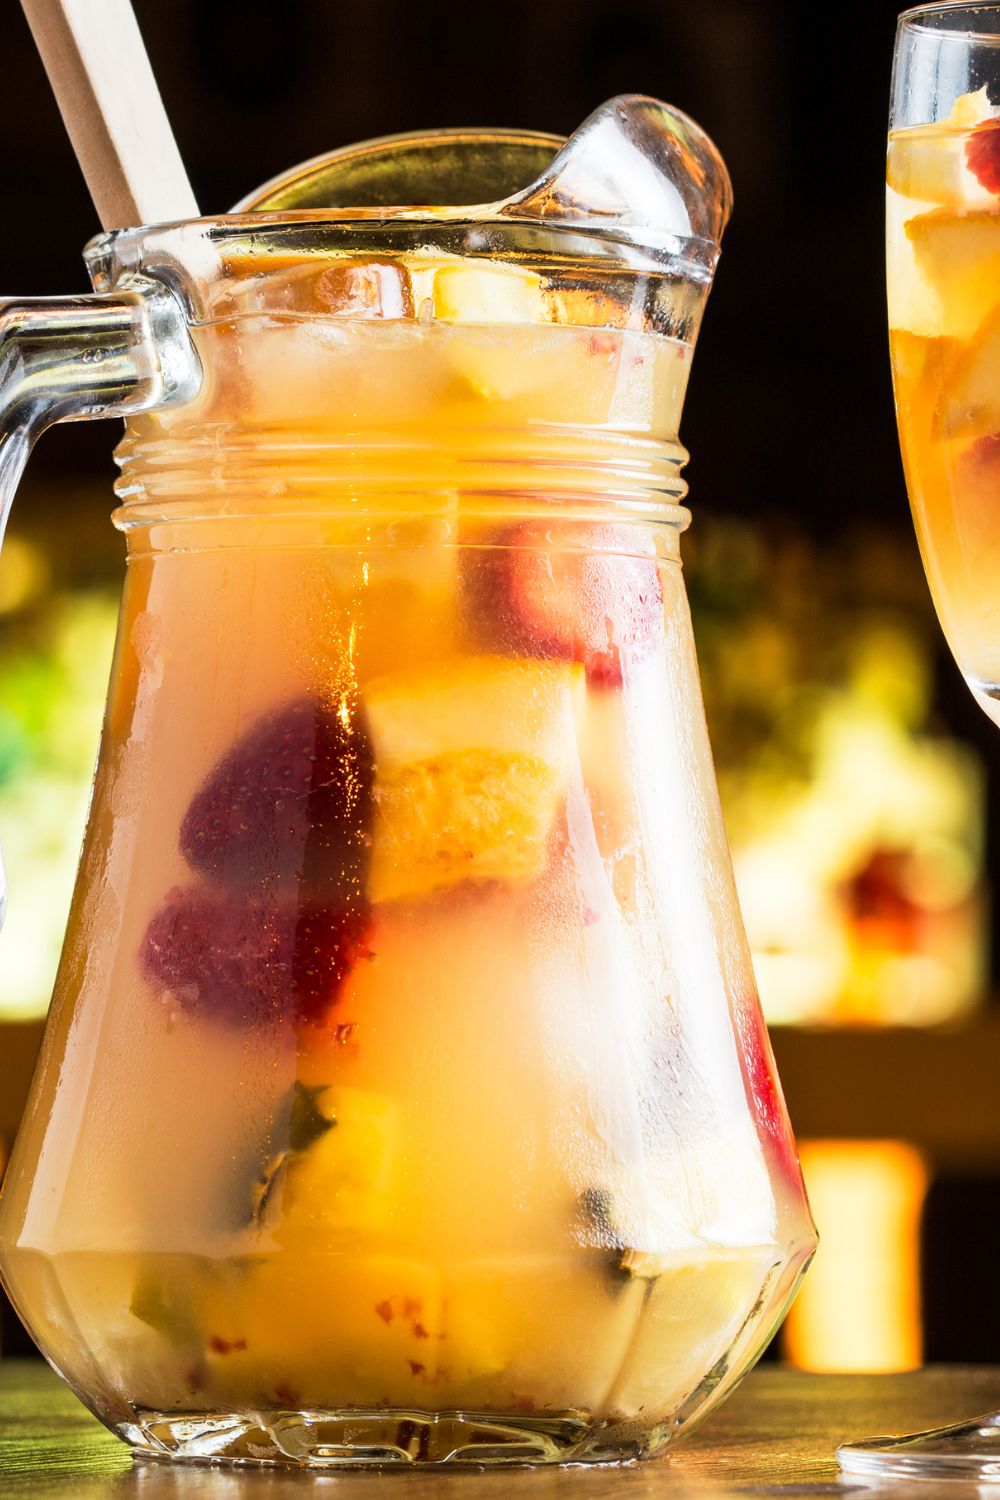 A pitcher filled with breakfast sangria and fruits